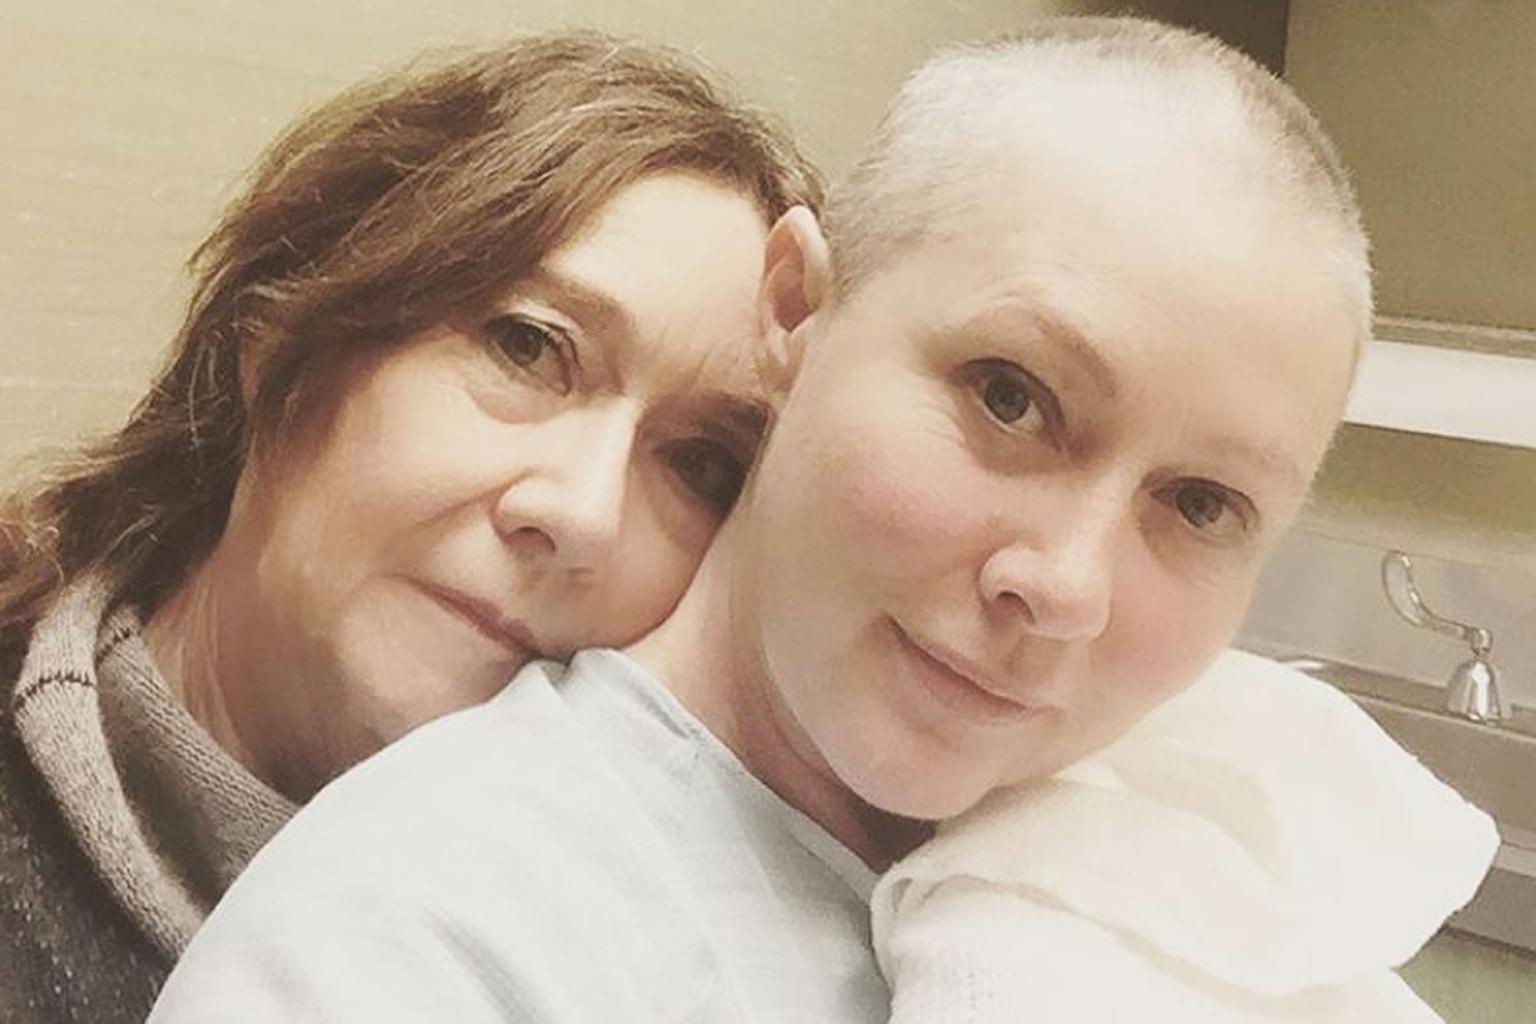 Shannen Doherty Undergoes Another Round of Radiation with Her Mother by Her Side